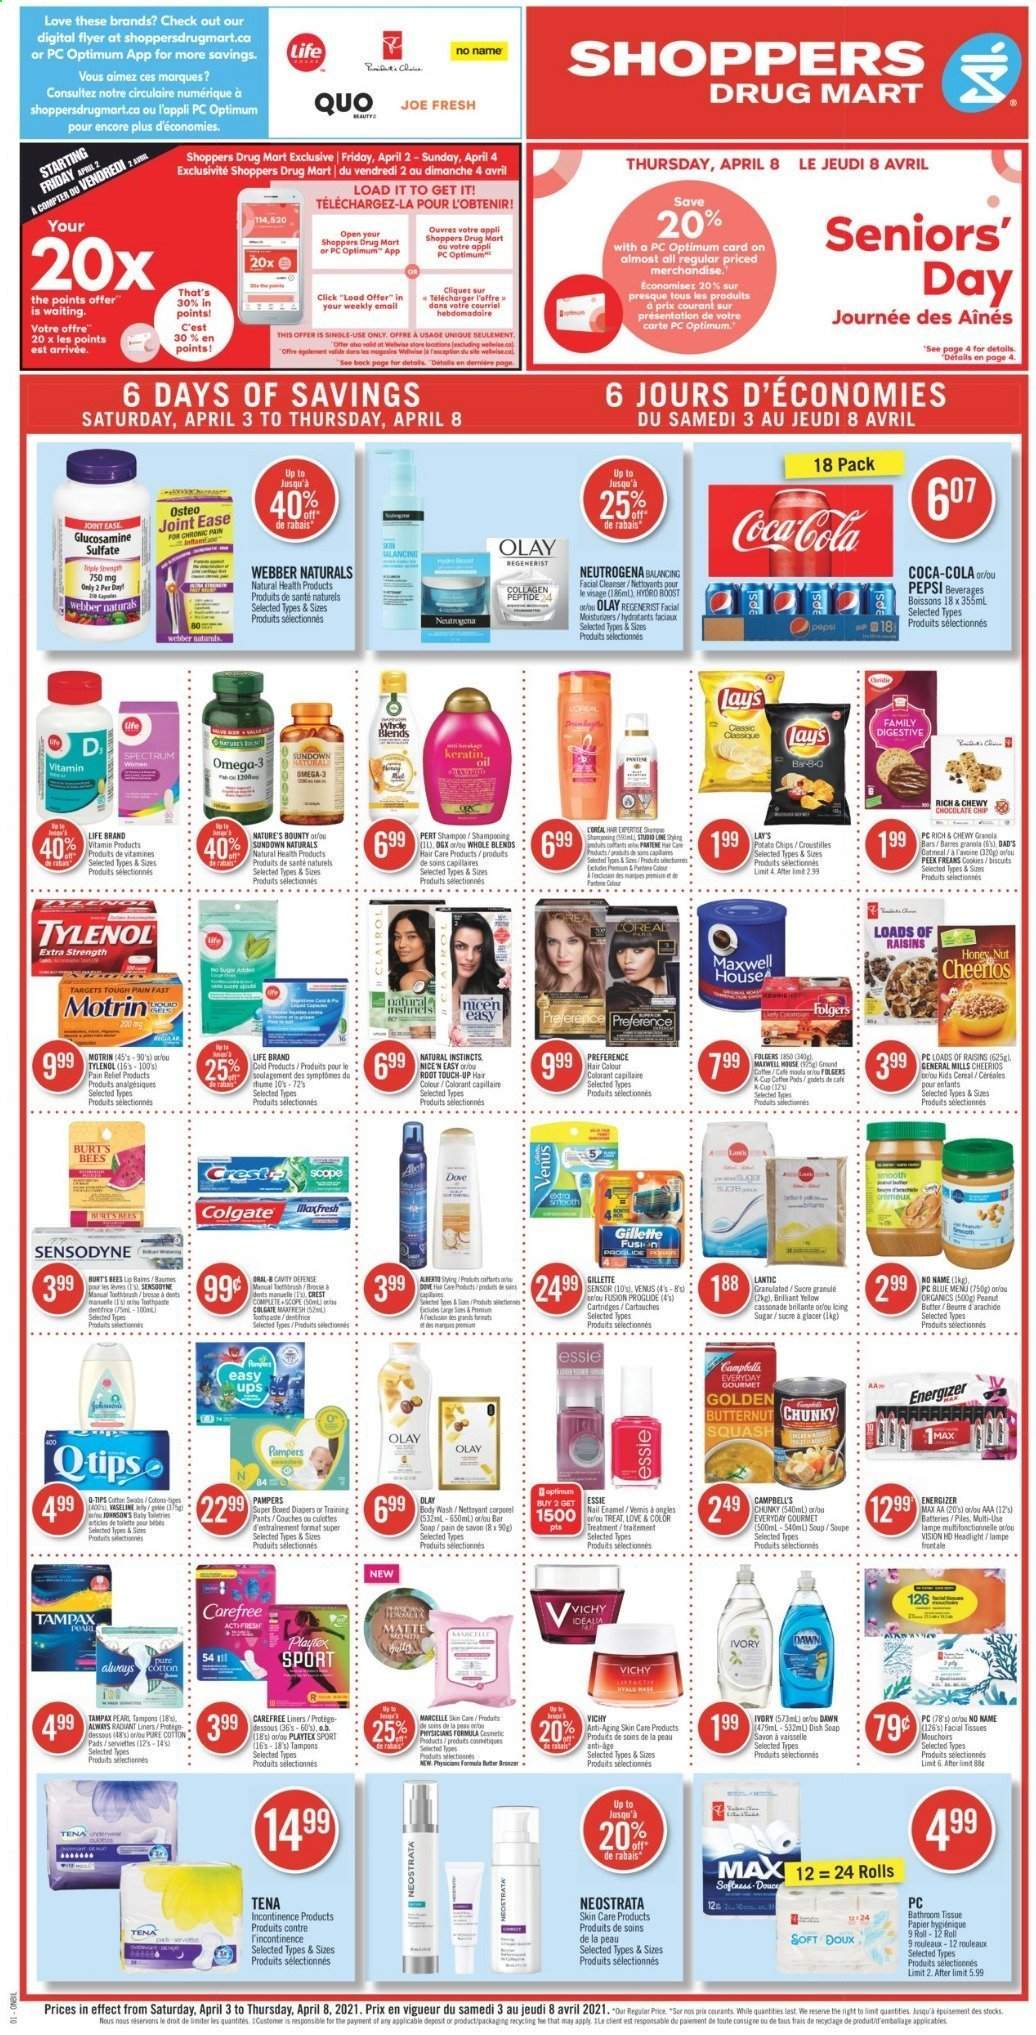 thumbnail - Shoppers Drug Mart Flyer - April 03, 2021 - April 08, 2021 - Sales products - cookies, potato chips, Lay’s, sugar, peas, soup, cereals, Cheerios, Campbell's, oil, dried fruit, Coca-Cola, Pepsi, Boost, Maxwell House, Folgers, pants, nappies, baby pants, bath tissue, body wash, Vichy, Vaseline, soap bar, soap, toothpaste, Crest, Playtex, Carefree, tampons, cleanser, facial tissues, L’Oréal, moisturizer, Olay, Root Touch-Up, hair color, keratin, Venus, nail enamel, bronzing powder, pain relief, glucosamine, Nature's Bounty, Sundown Naturals, Tylenol, Omega-3, Spectrum, Motrin, Gillette, granola, Neutrogena, raisins, shampoo, Tampax, Pampers, chips, Sensodyne. Page 1.